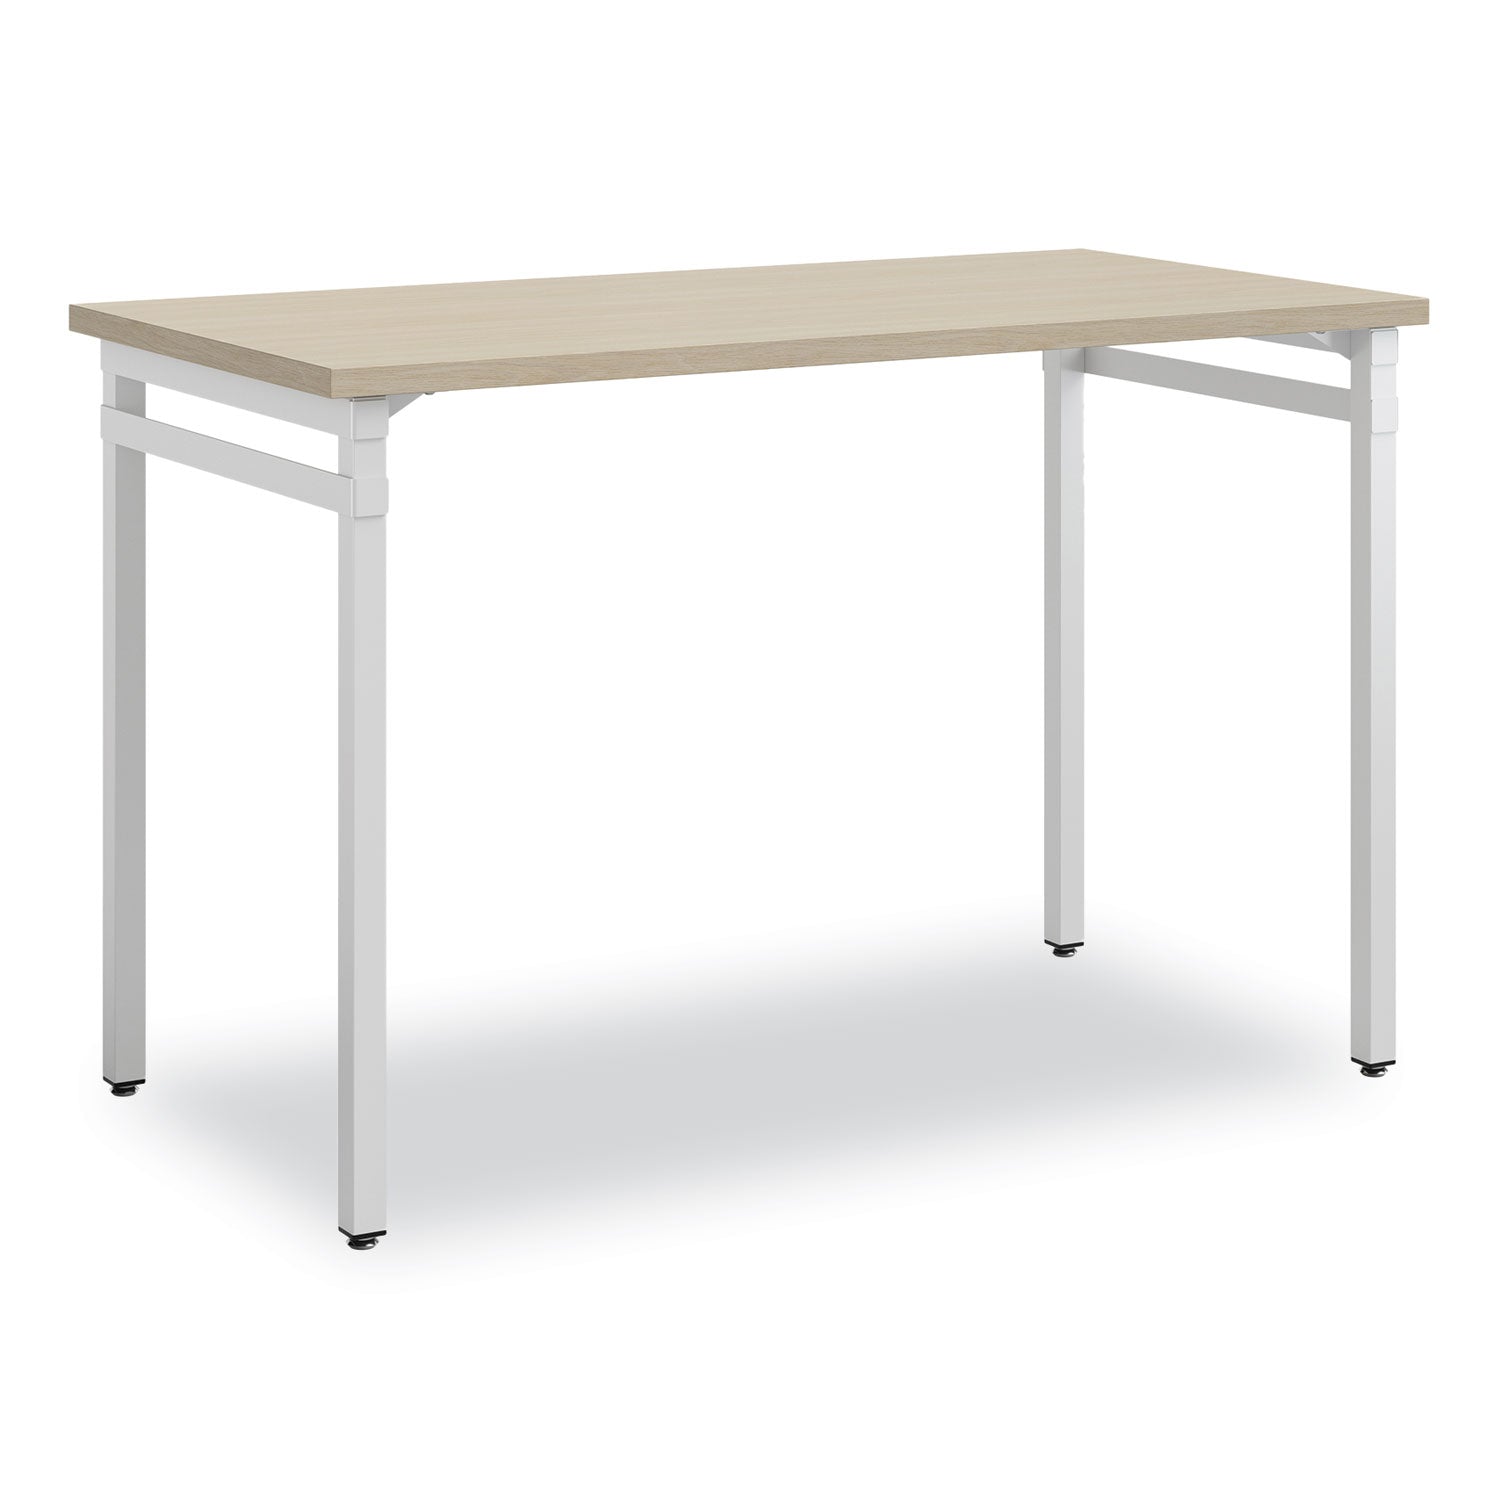 ready-home-office-desk-455-x-235-to-295-beige-white-ships-in-1-3-business-days_saf5508whna - 1